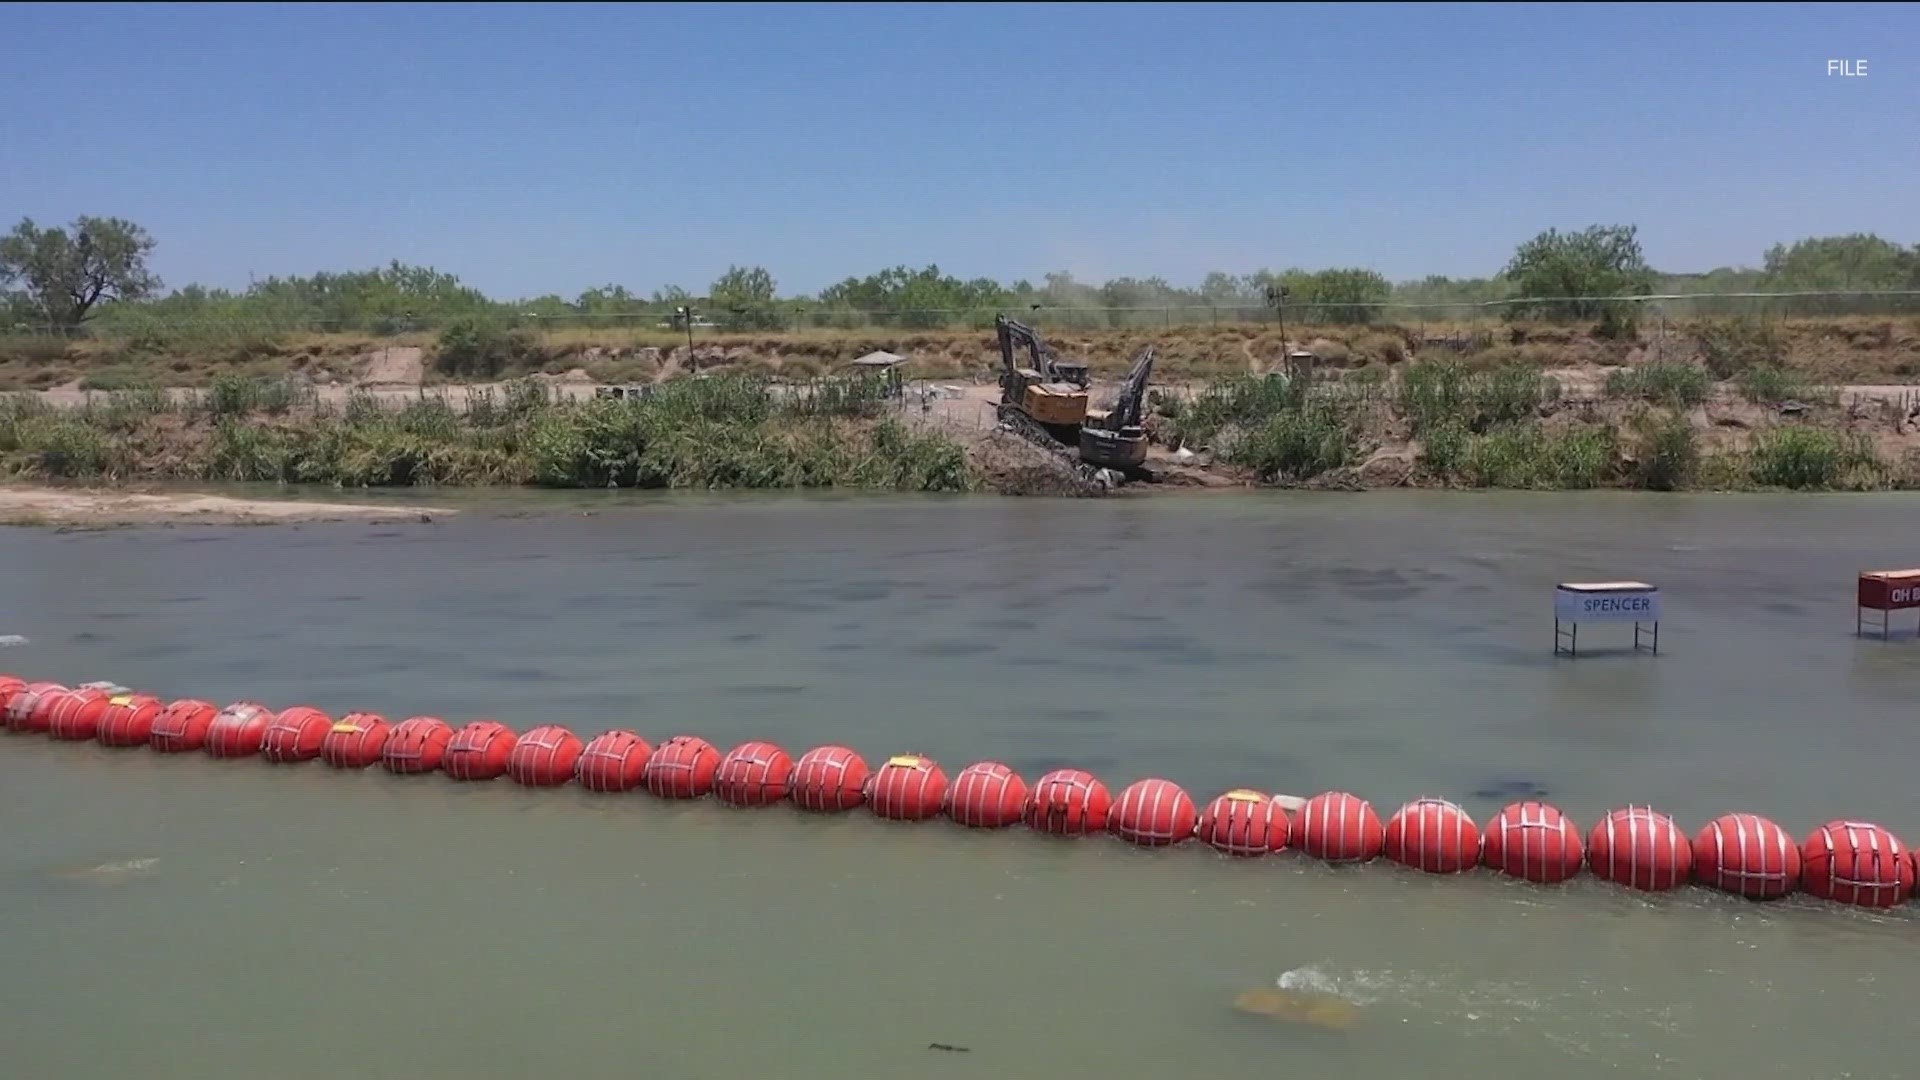 A ruling from the 5th Circuit Court of Appeals in New Orleans overruled a Texas judge's ruling that would've required the state to move the buoys.